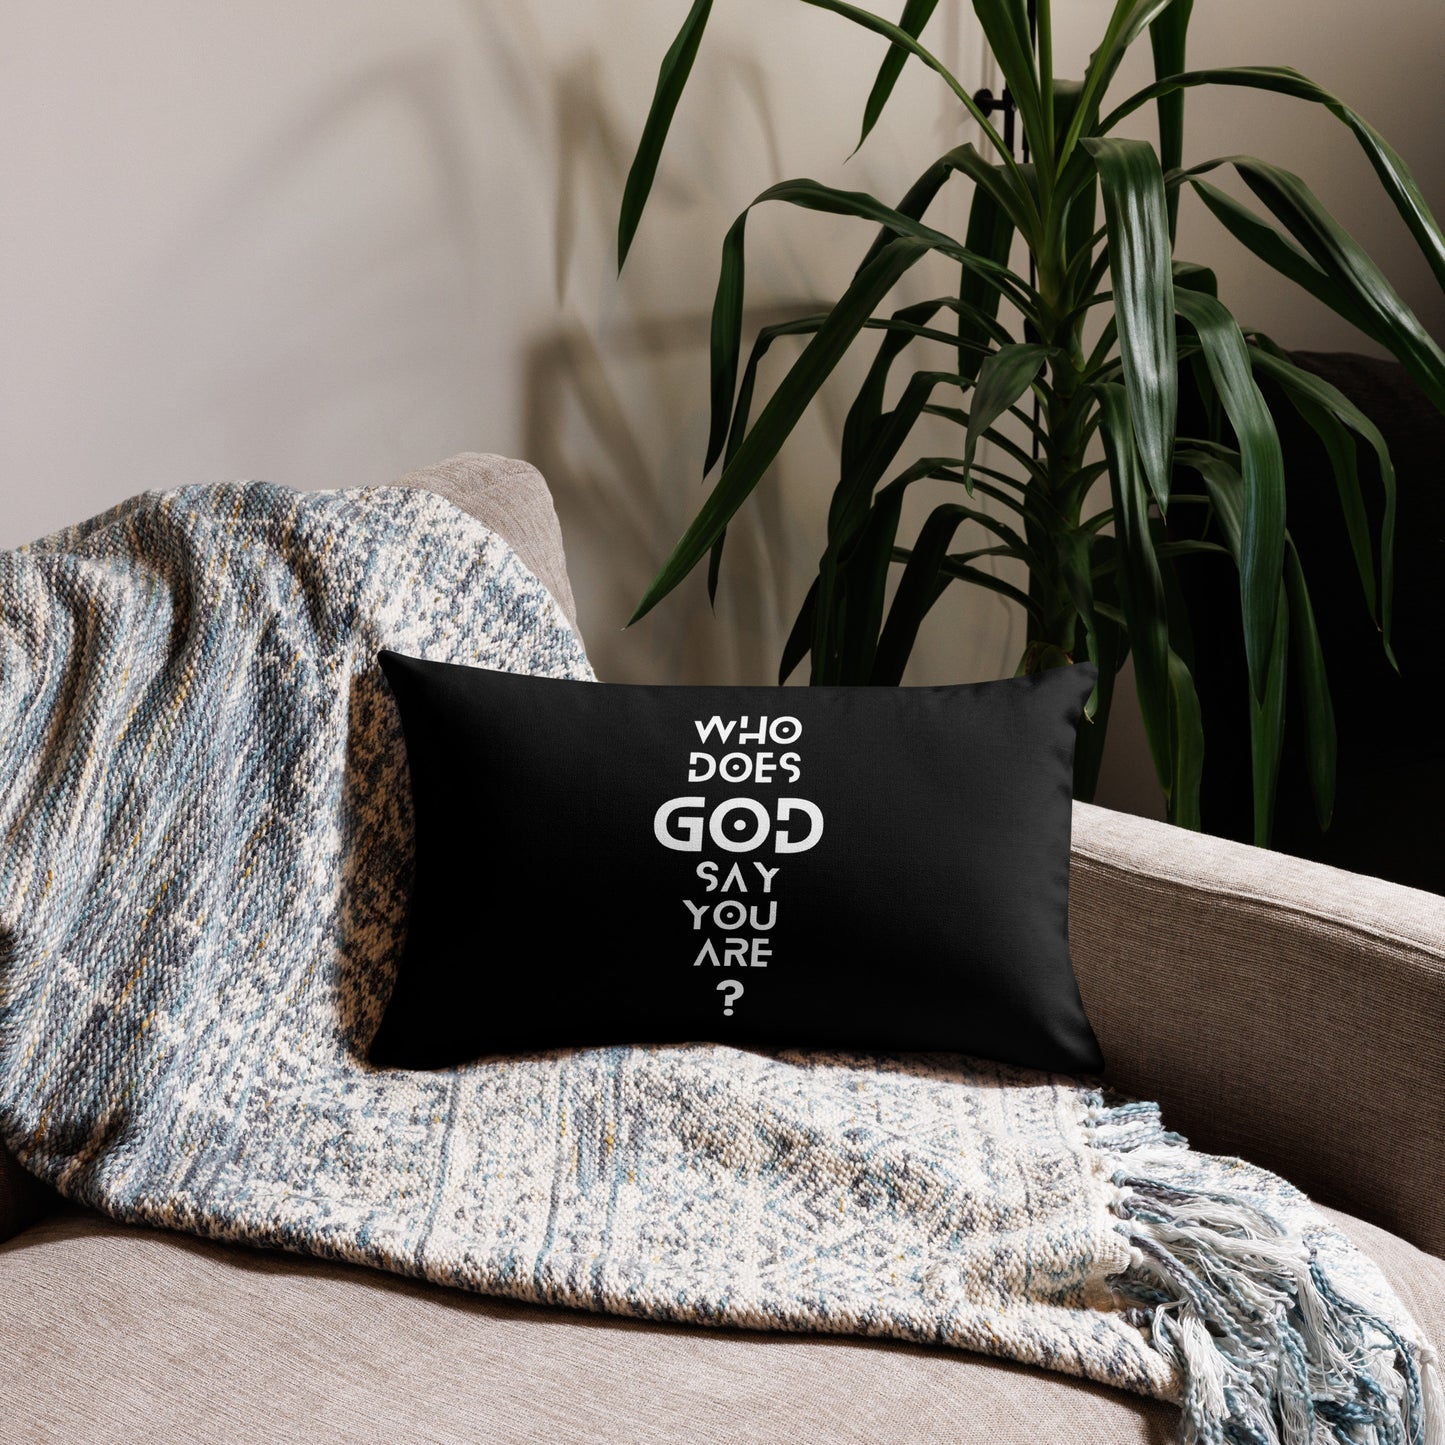 WHO DOES GOD SAY YOU ARE? Premium Pillow Case (PILLOW SOLD SEPARATELY)